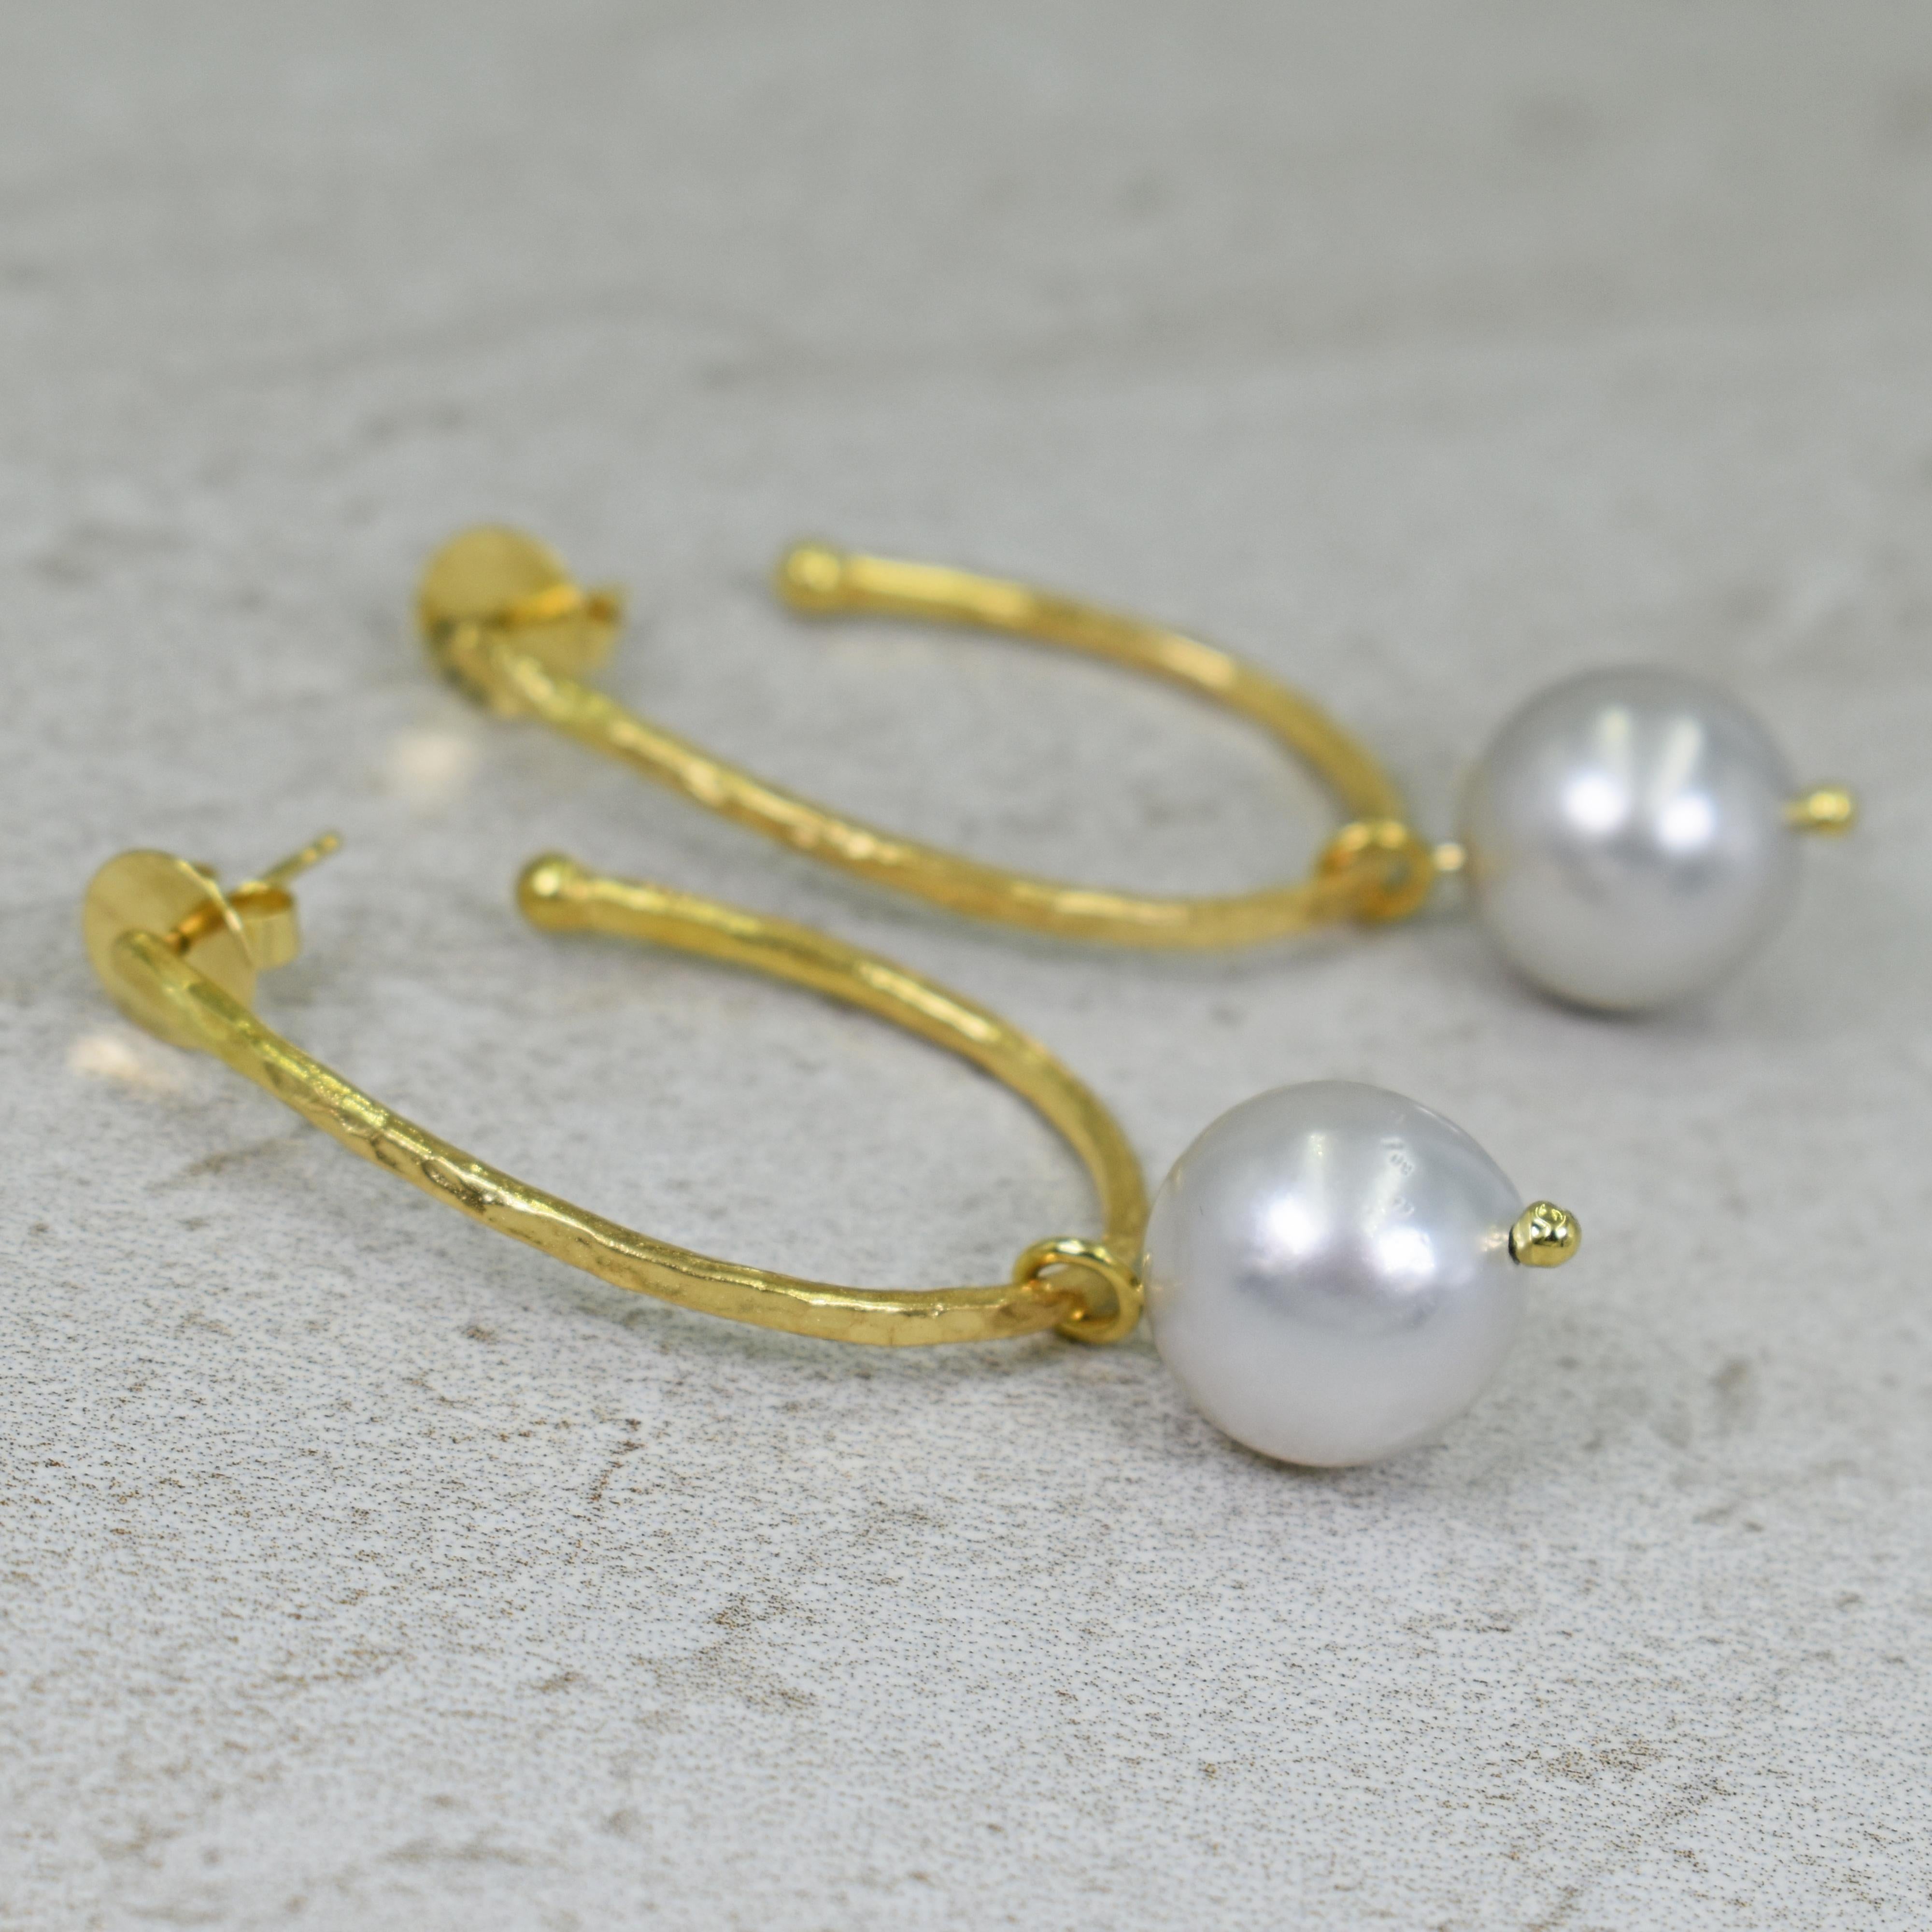 Hammered 18k yellow gold elongated hoop stud earrings with 14.5mm Dove Gray Freshwater Pearl charms. Hoop earrings are 1.63 inches in length, and with pearl charms, earrings are 2.38 inches in total length. Charms can be removed so the hoops can be